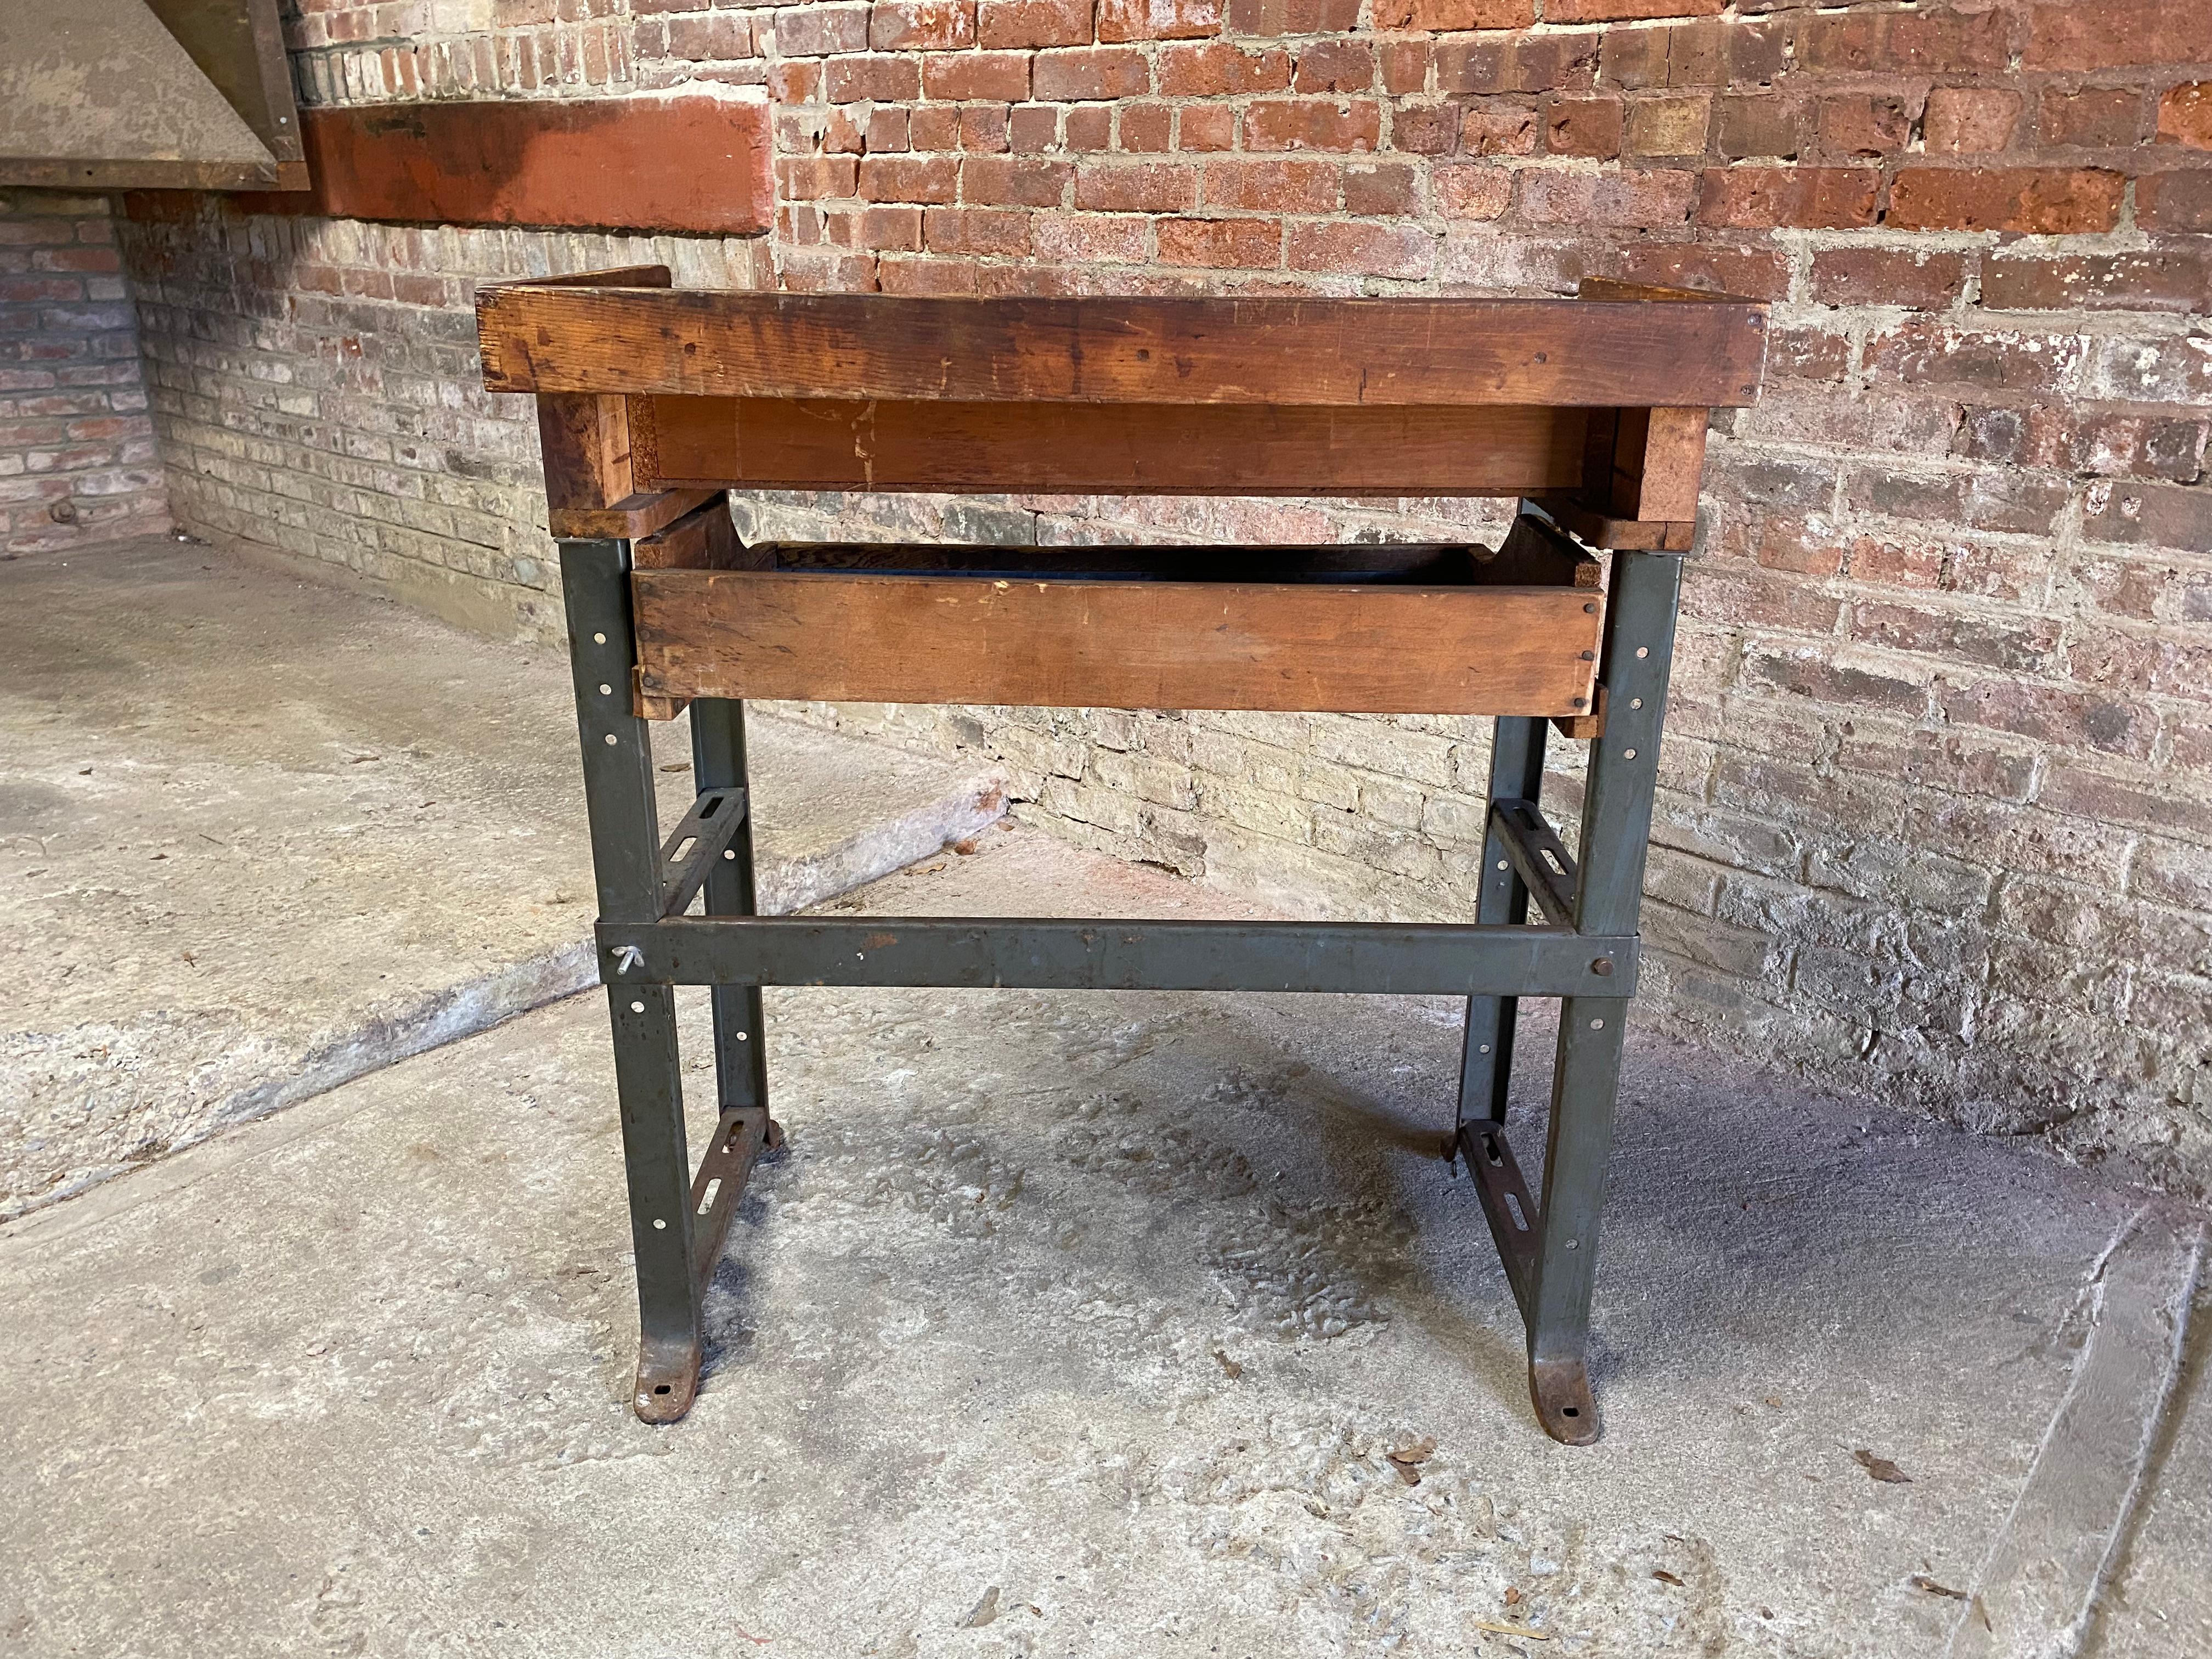 20th Century Industrial Jeweler's Bench Work Table